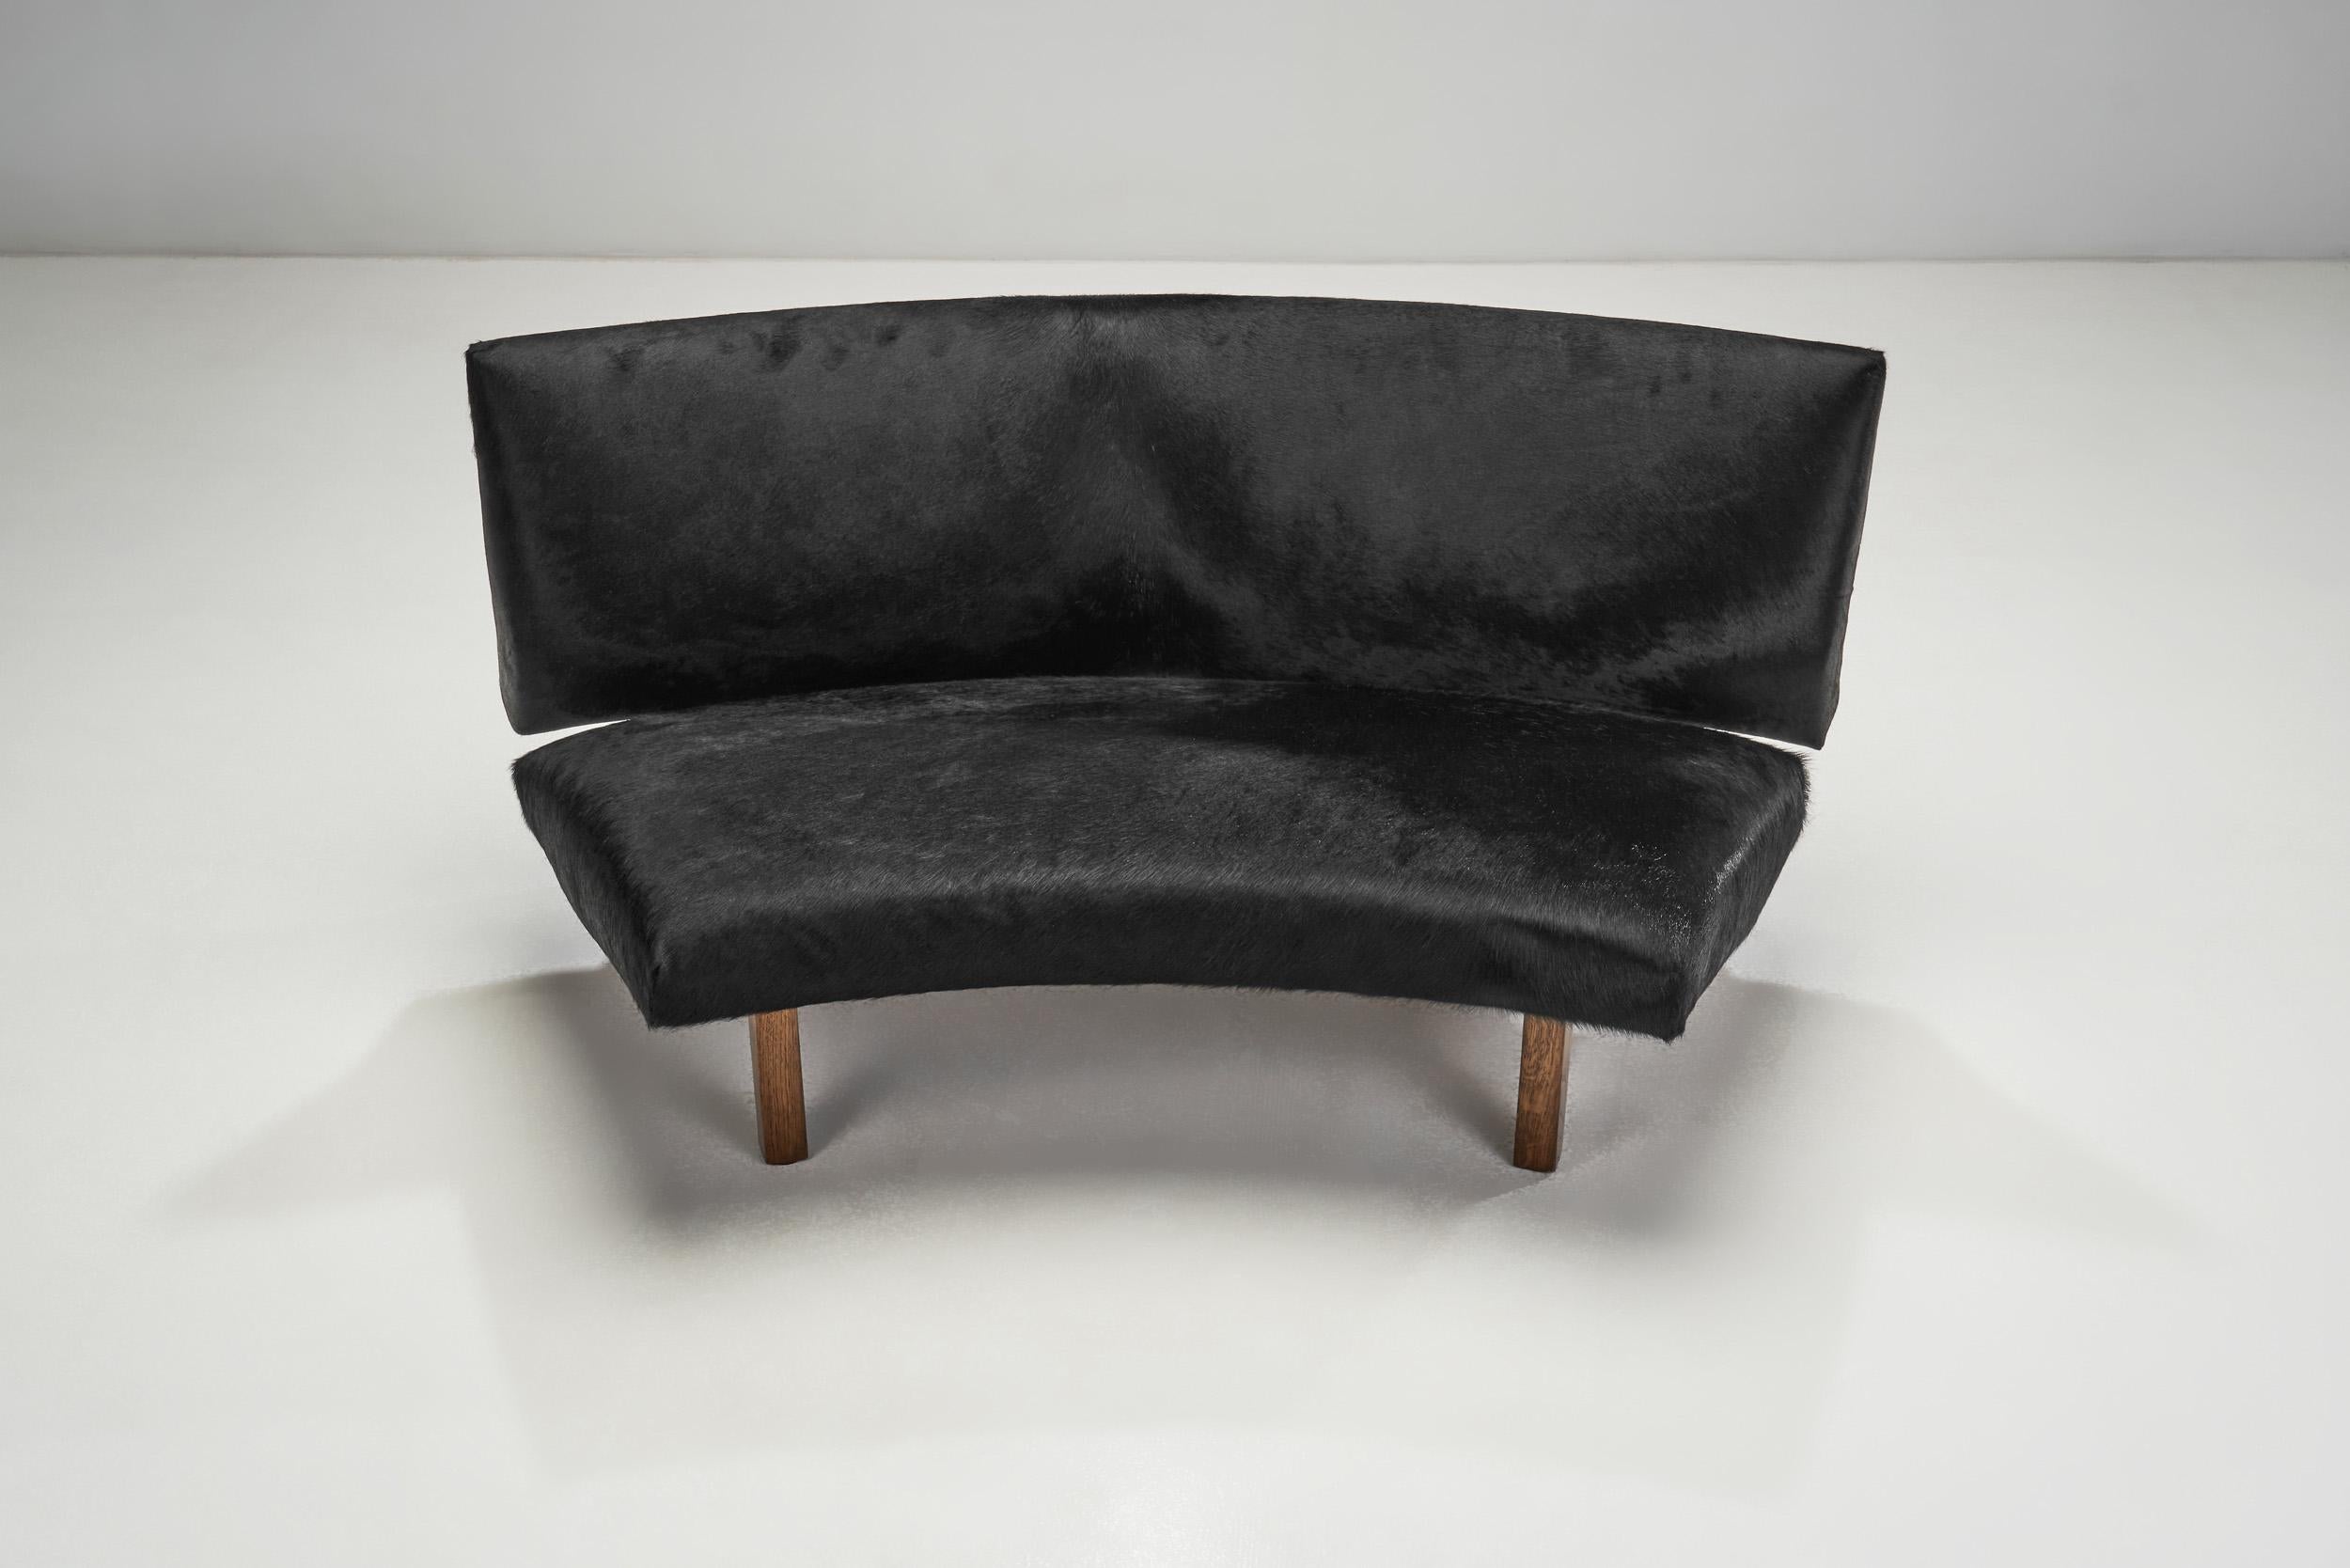 Cowhide European Mid-Century Two Part Sofa in Black Cow Hide, Europe Ca 1950s For Sale